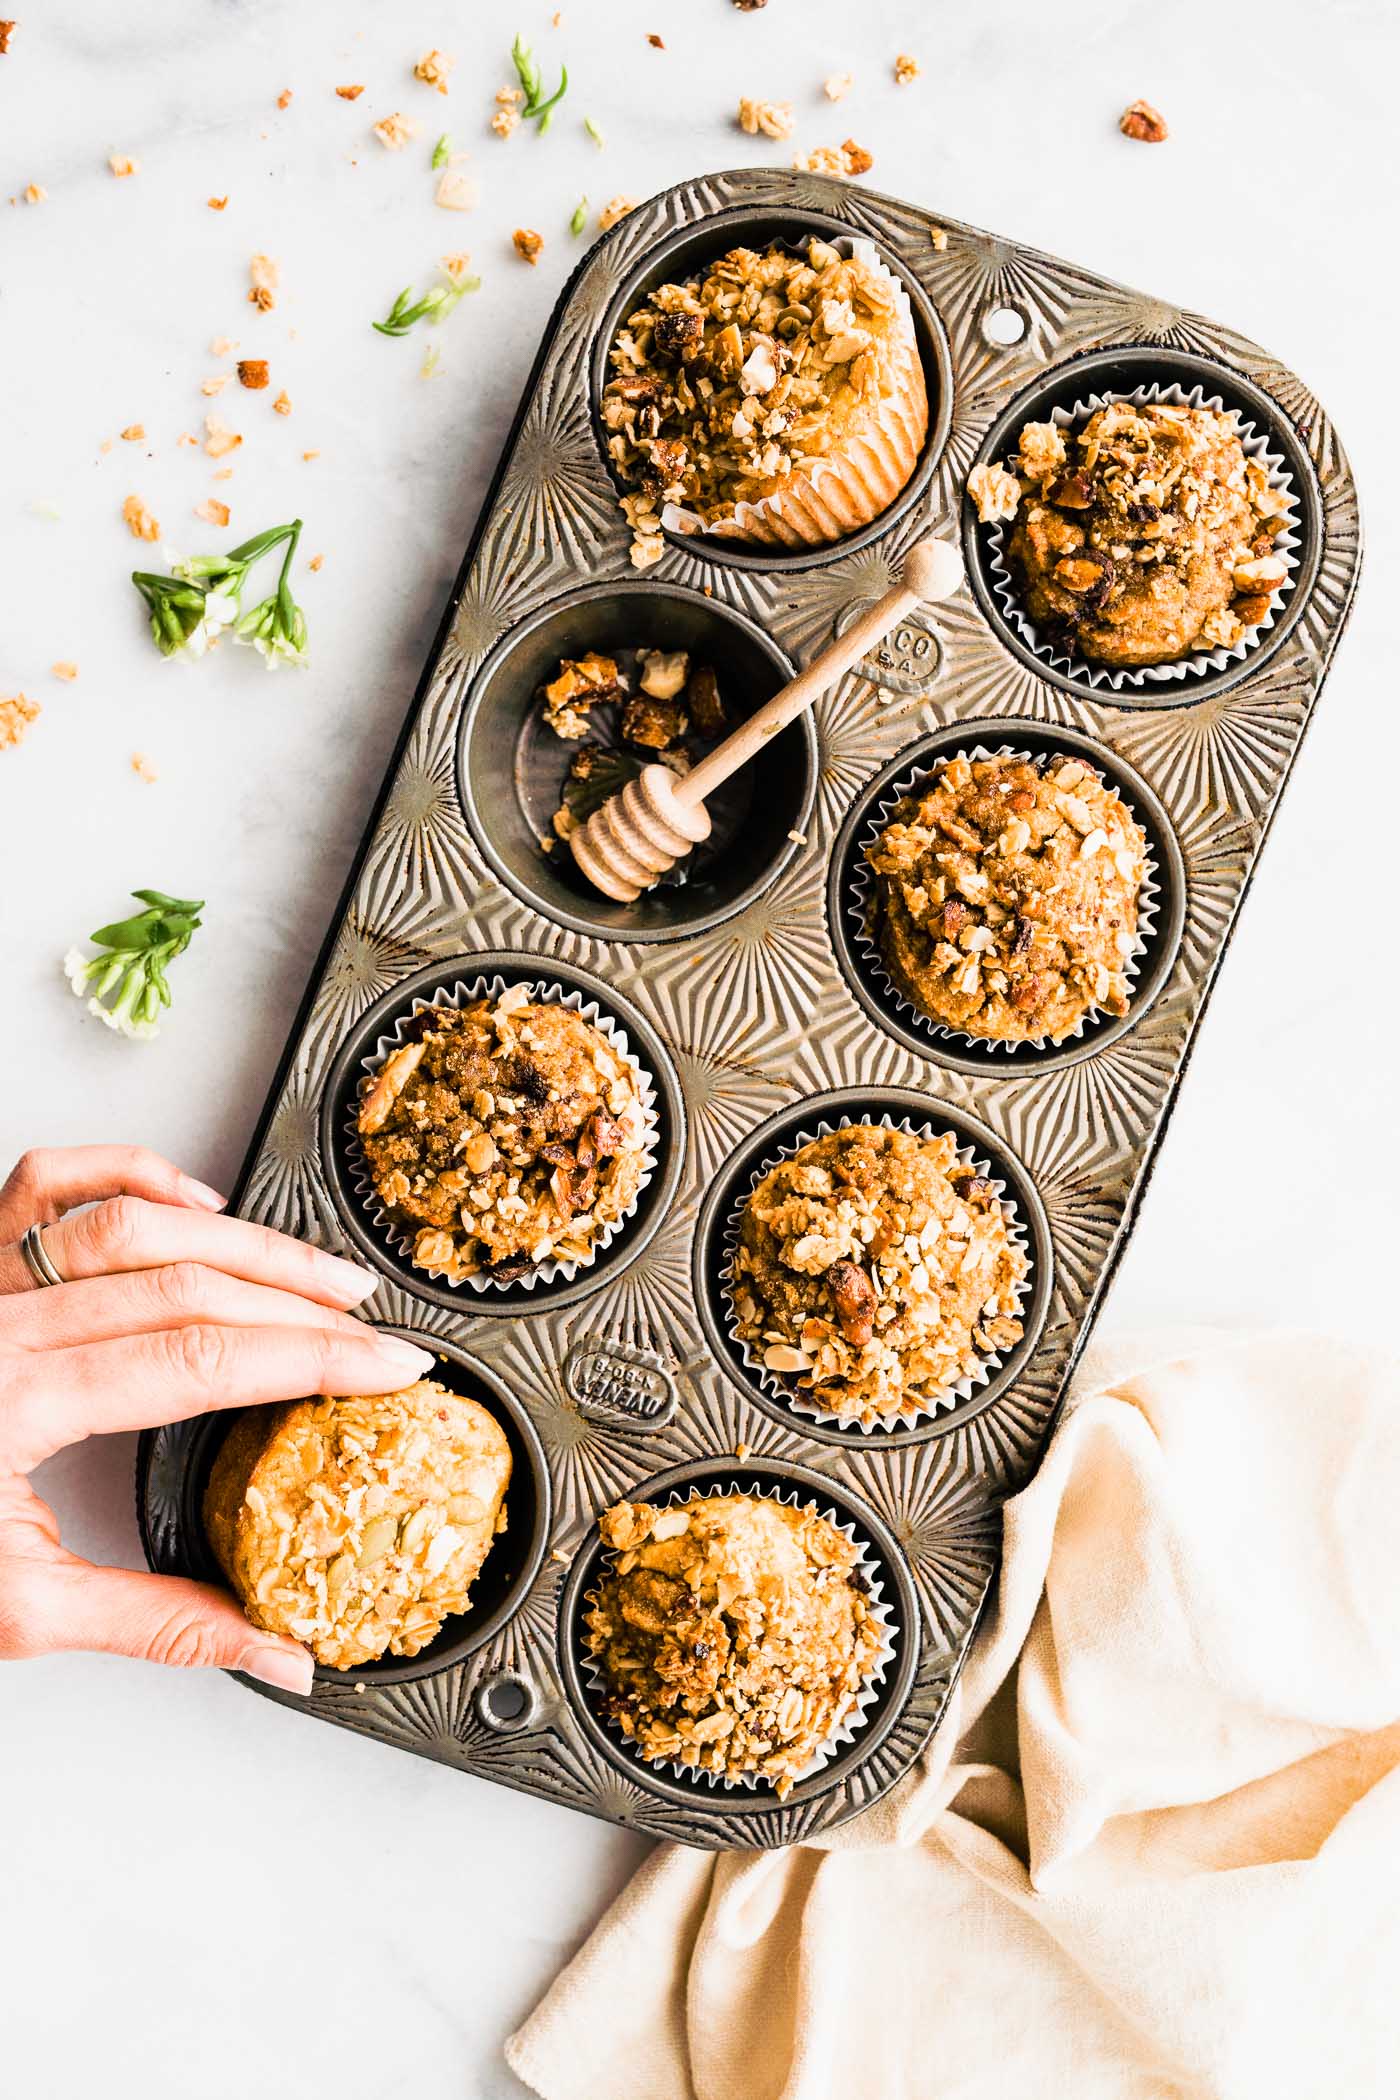 Six-count muffin pan filled with breakfast muffins topped with crumble, one muffin removed.